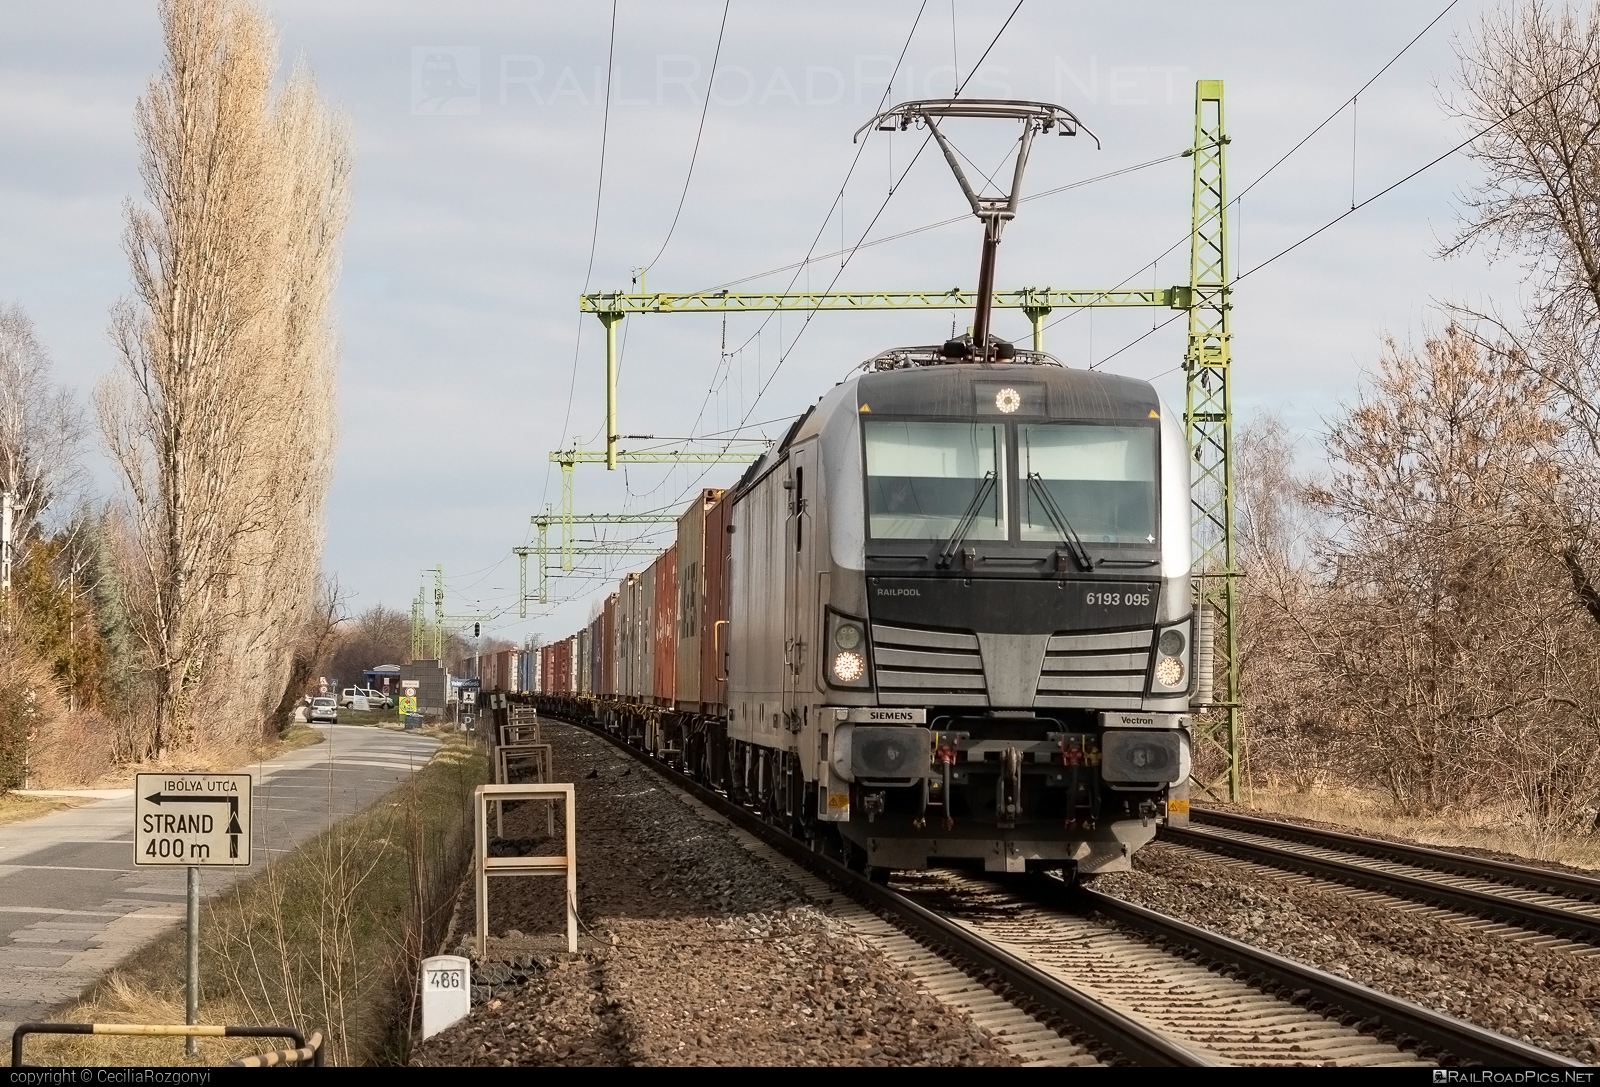 Siemens Vectron MS - 6193 095 operated by ENNA TRANSPORT d.o.o. za prijevoz tereta #container #enna #flatwagon #railpool #railpoolgmbh #siemens #siemensVectron #siemensVectronMS #vectron #vectronMS